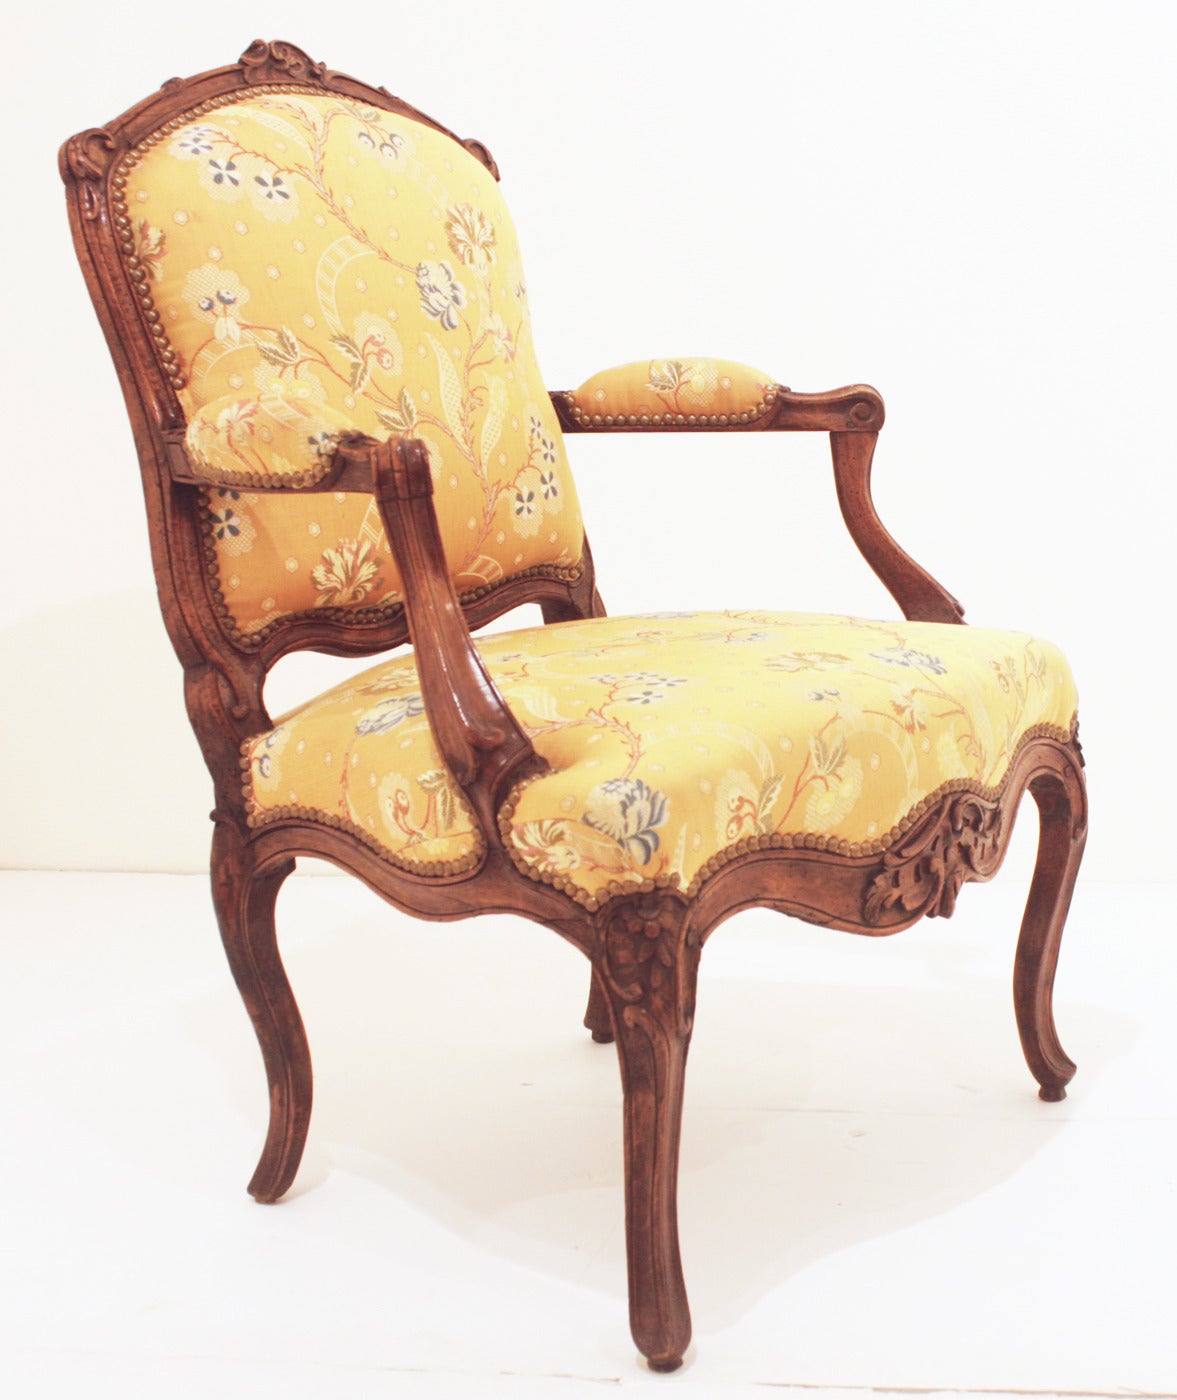 A  Louis XV period arm chair made of walnut with shaped back and seat, curved arms and apron. It is excellently carved with detailed floral and foliate motif. The chair is raised by cabriole legs ending in pad feet. The back and seat are upholstered